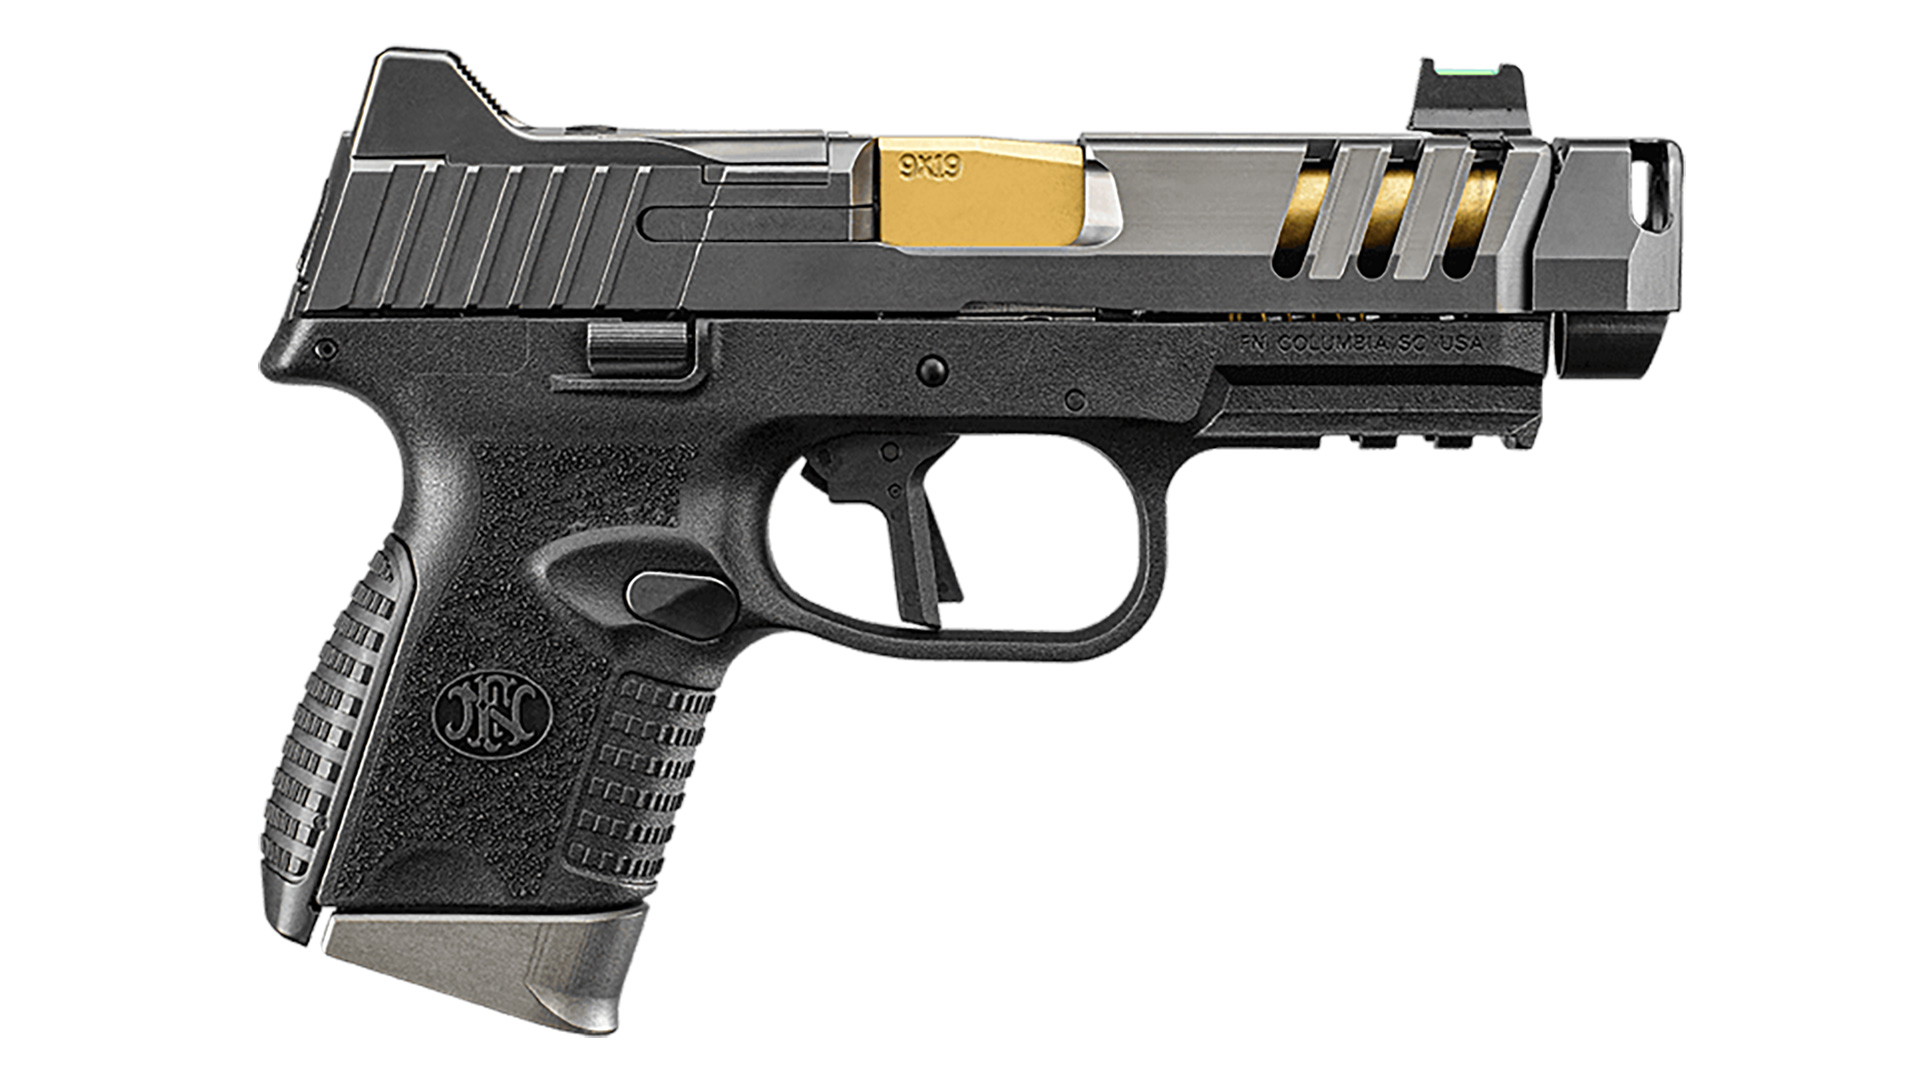 FN Introduces the NEW 509 CC Edge Compensated Carry Pistol